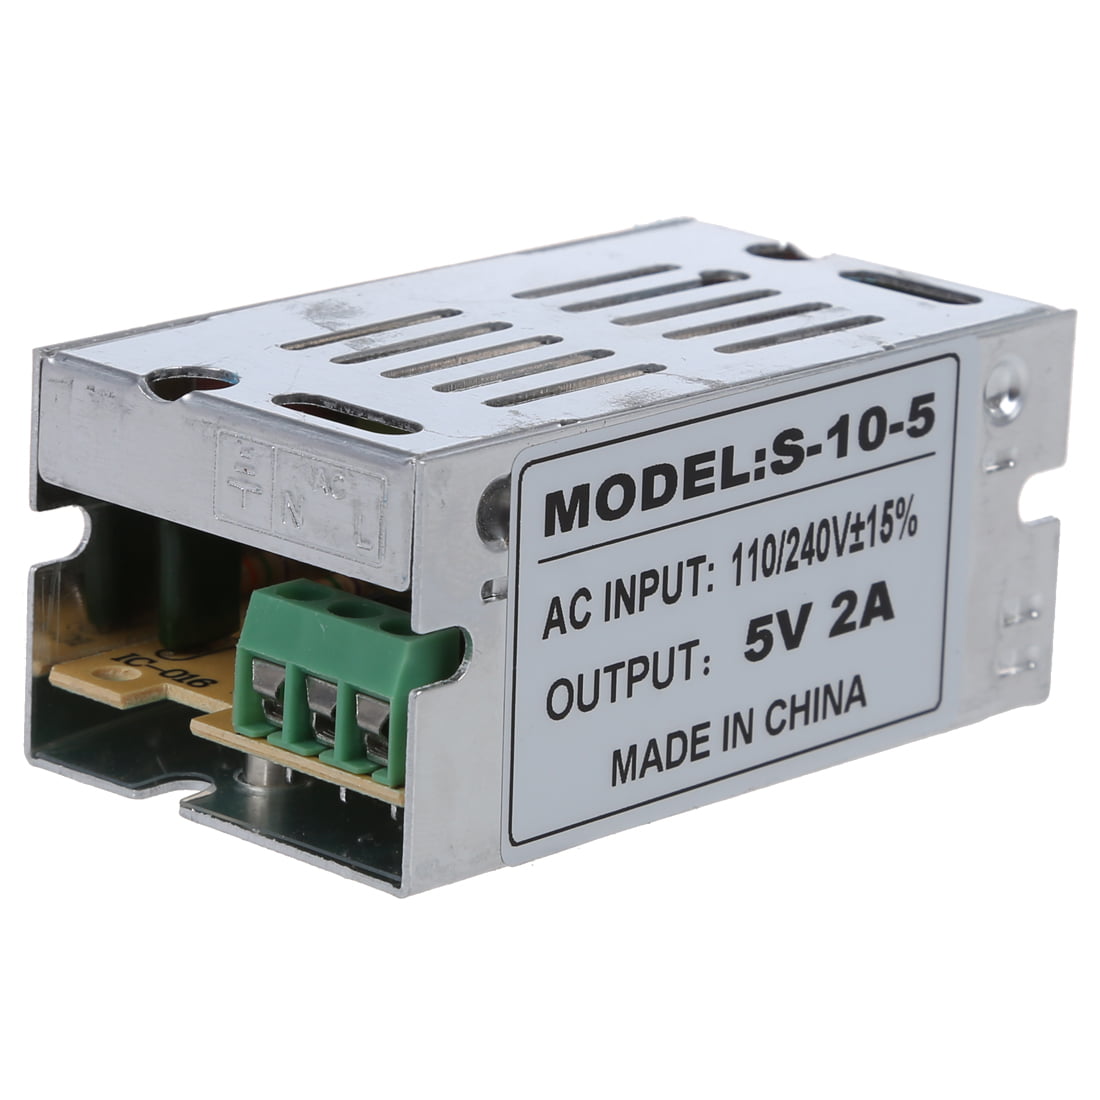 AC 110-240v to DC 5v Switching Power Supply Converter SA10-05 WS A9g7 for sale online 